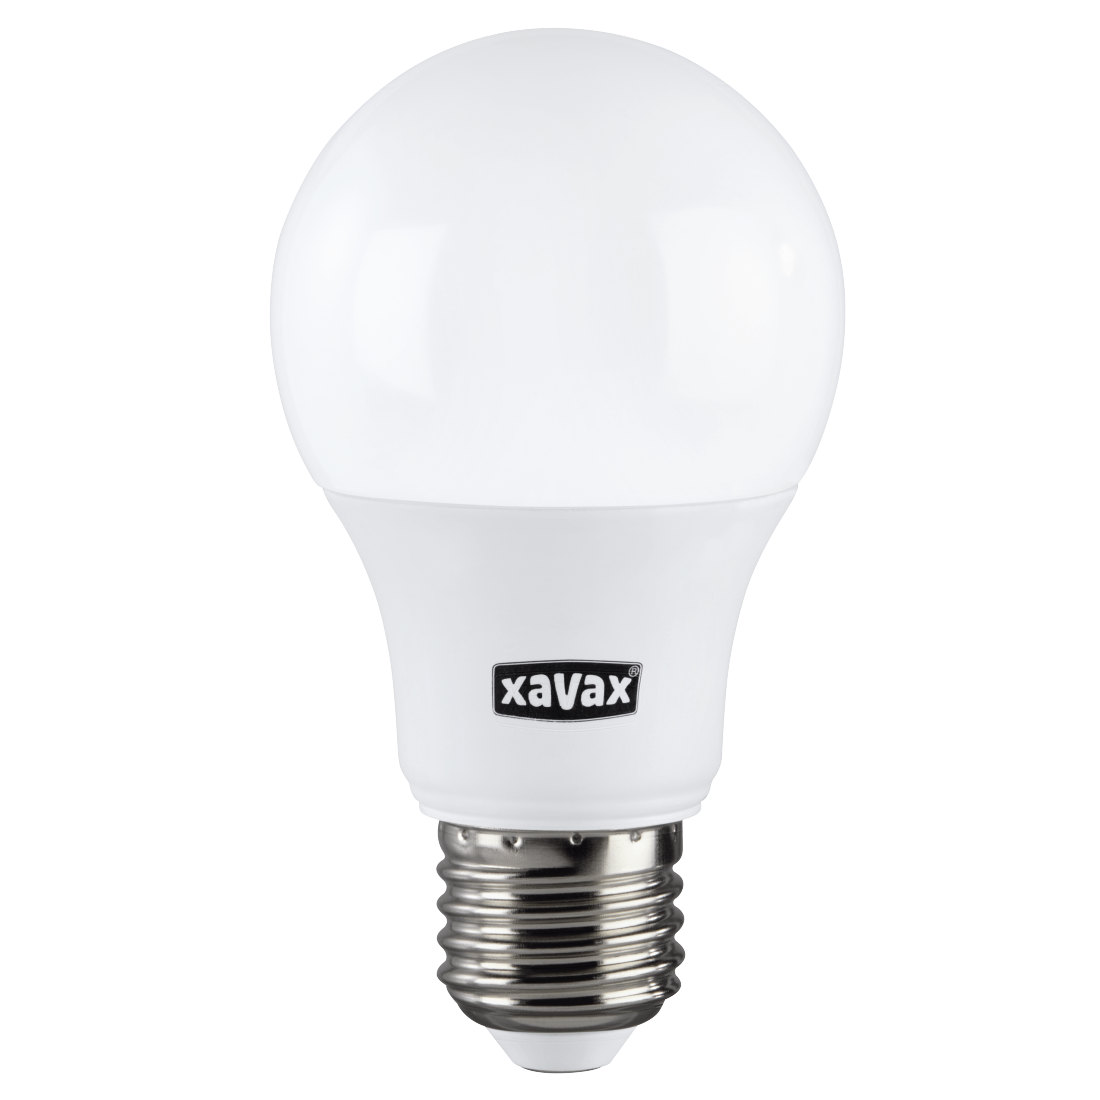 abx High-Res Image - Xavax, LED Bulb, E27, 470lm replaces 40W, incandescent bulb, warm, dimmable